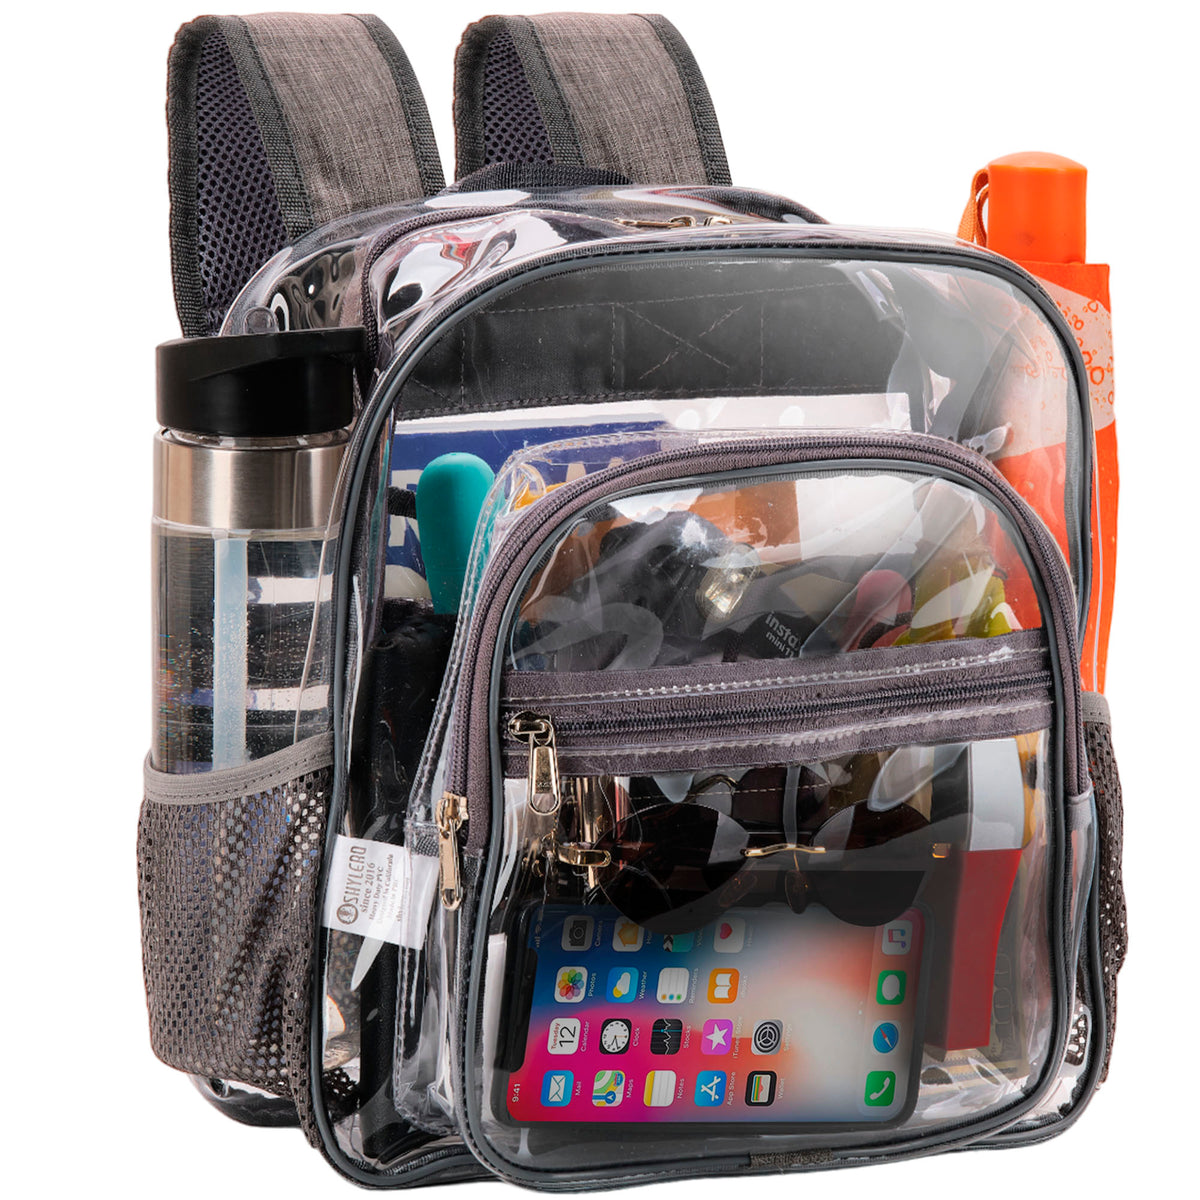 Clear PVC Backpack Stadium Approved | S | 2-WAY Zip | H11.8''xW11''xD6''| Gray